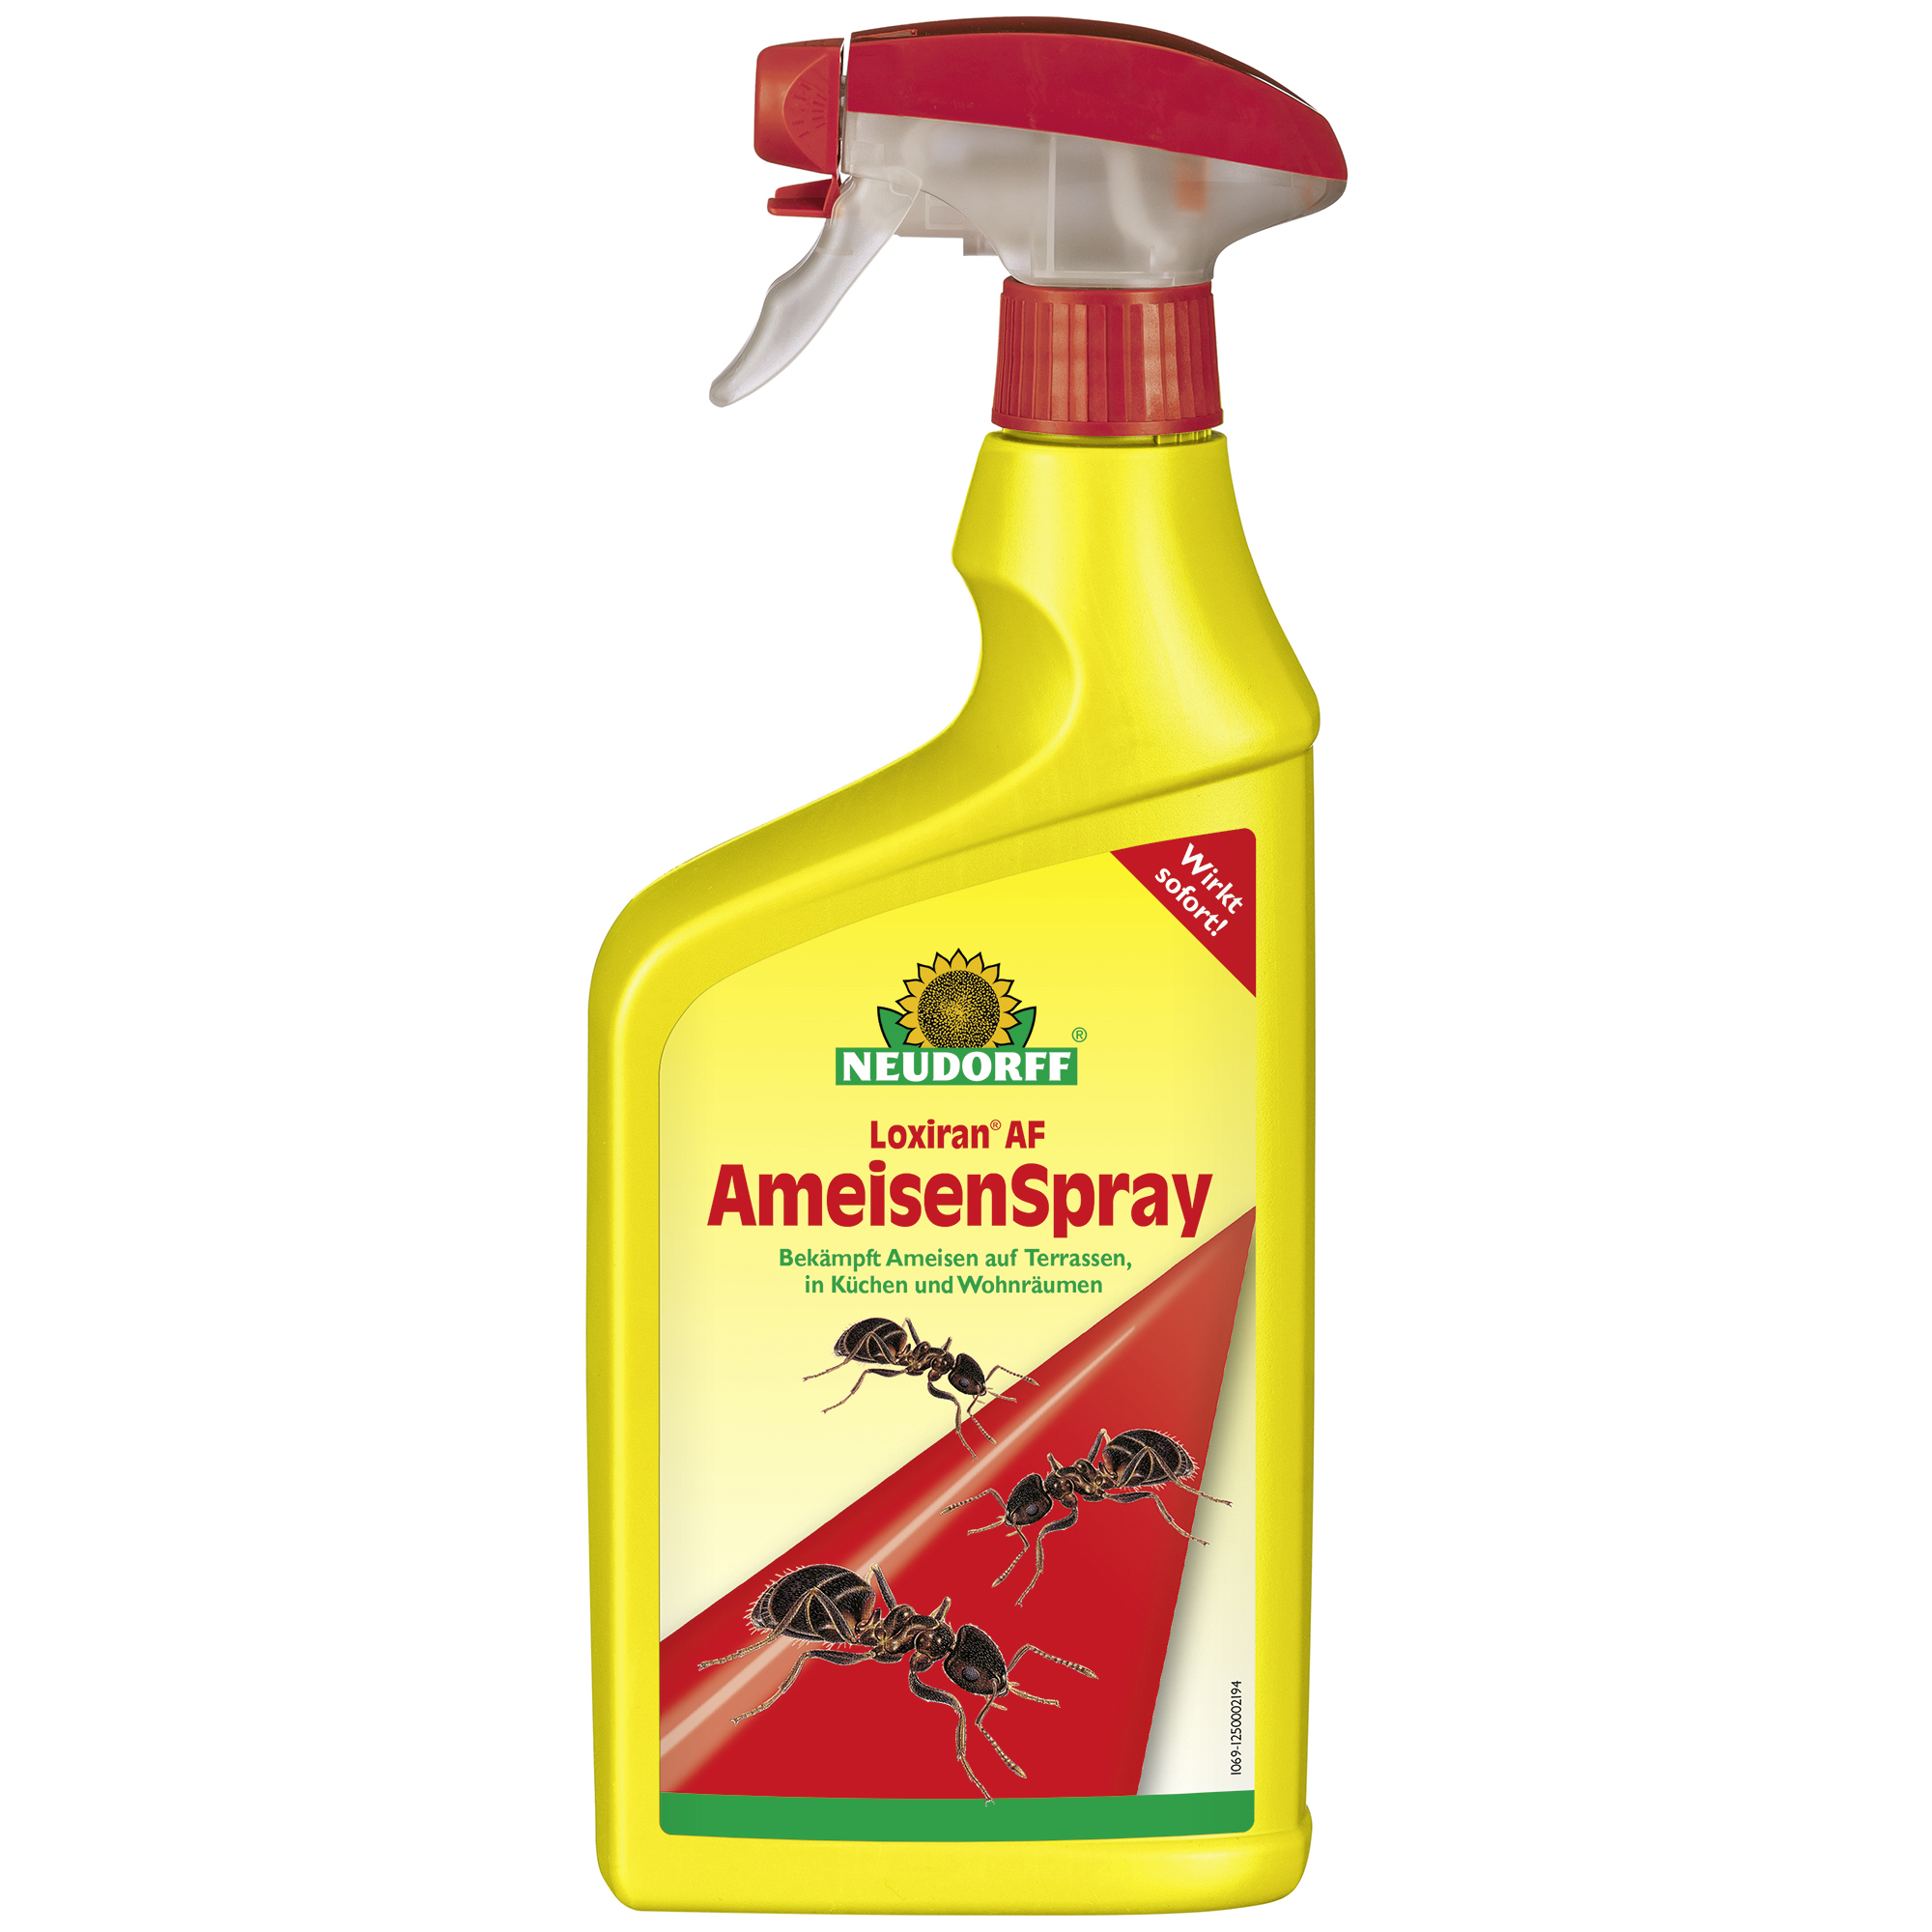 Loxiran AF AmeisenSpray 750 ml + product picture